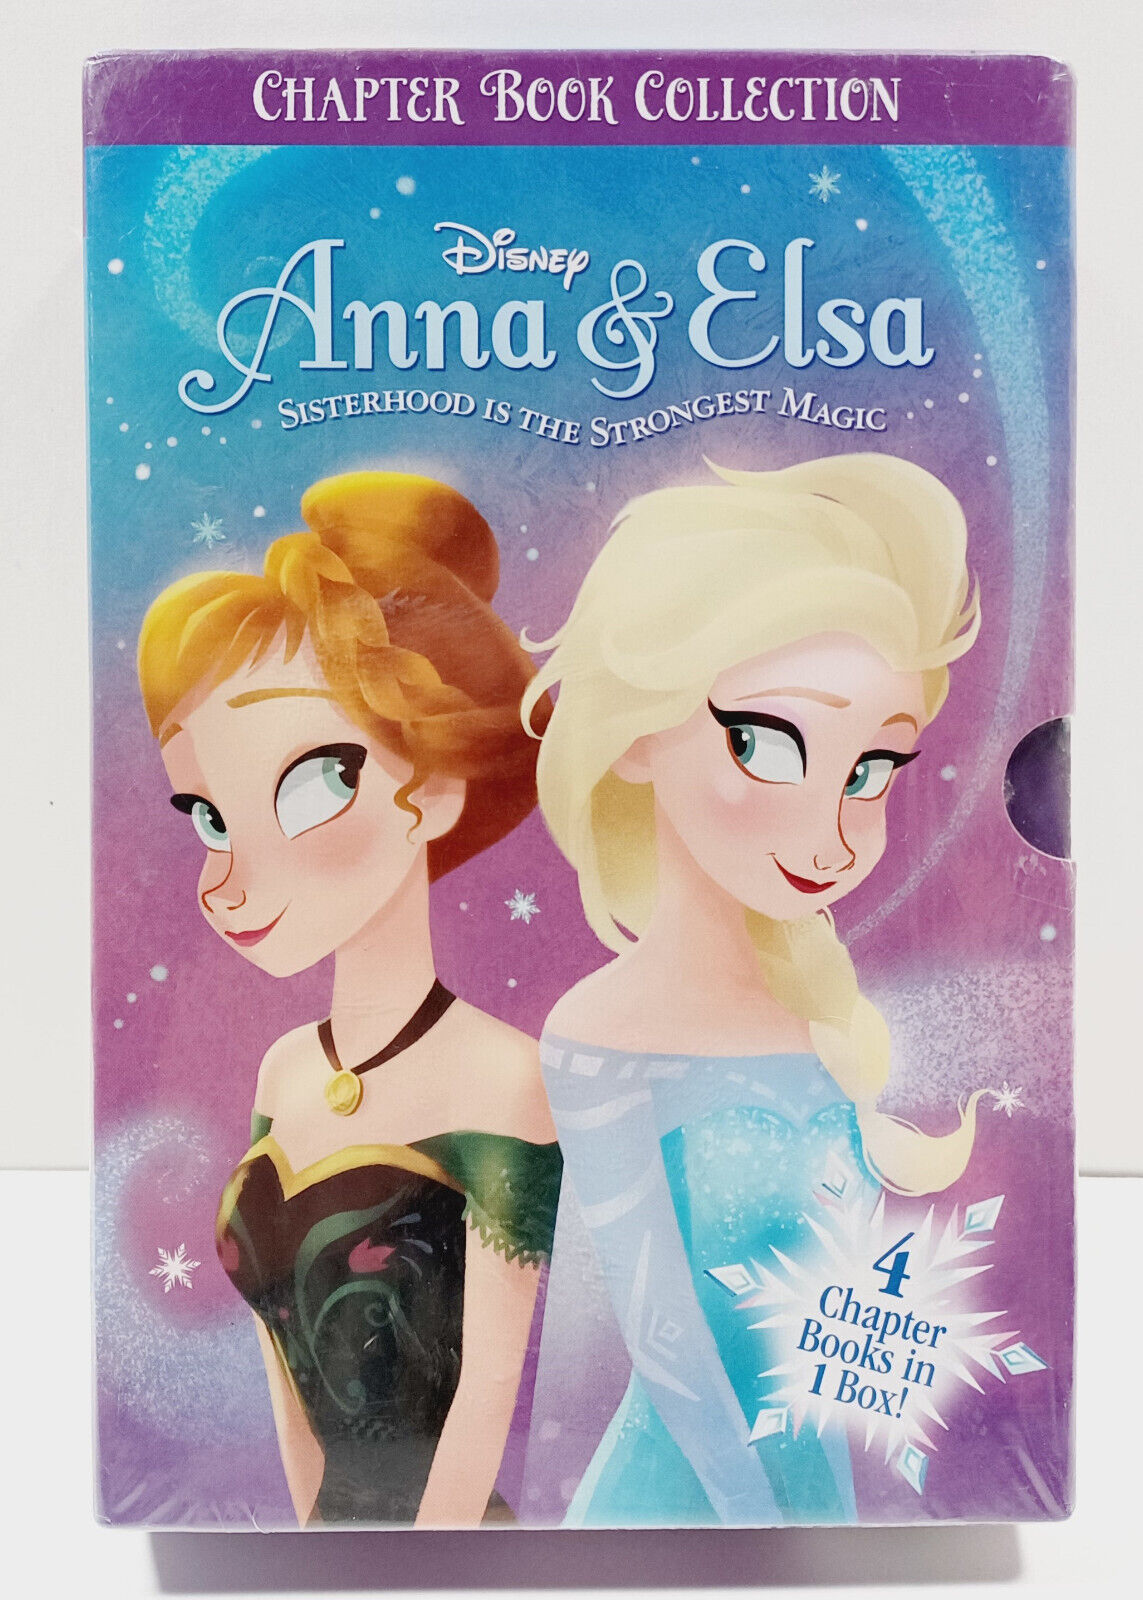 Anna And Elsa -Sisterhood is the Strongest Magic - 4 Chapter Book Set